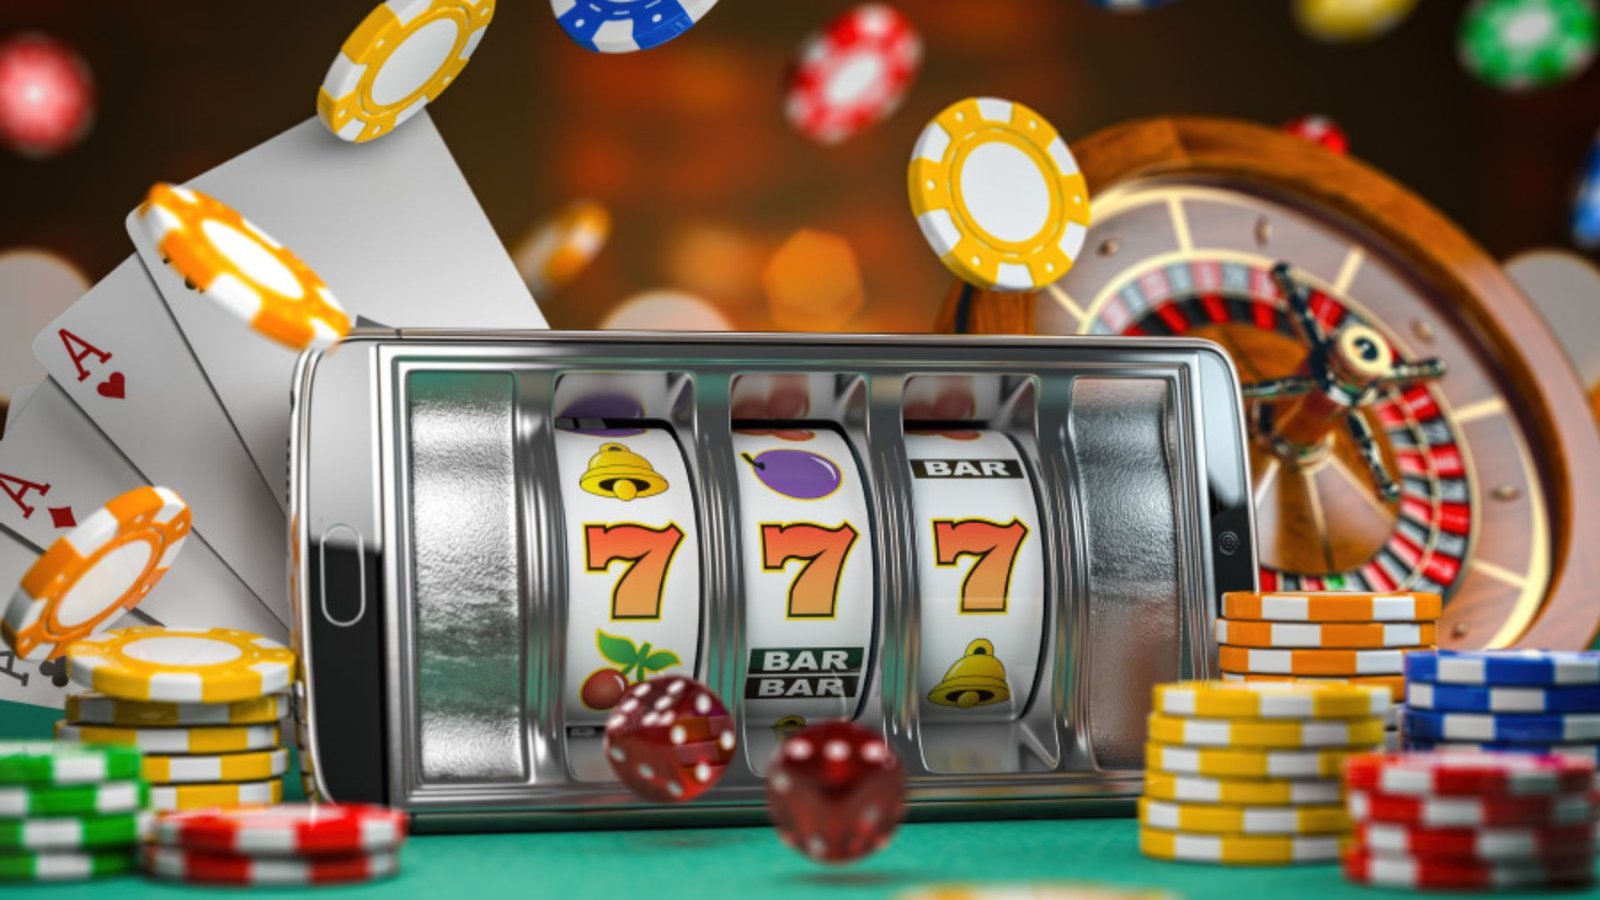 this image shows some of the Online Casino Games to play on a Budget